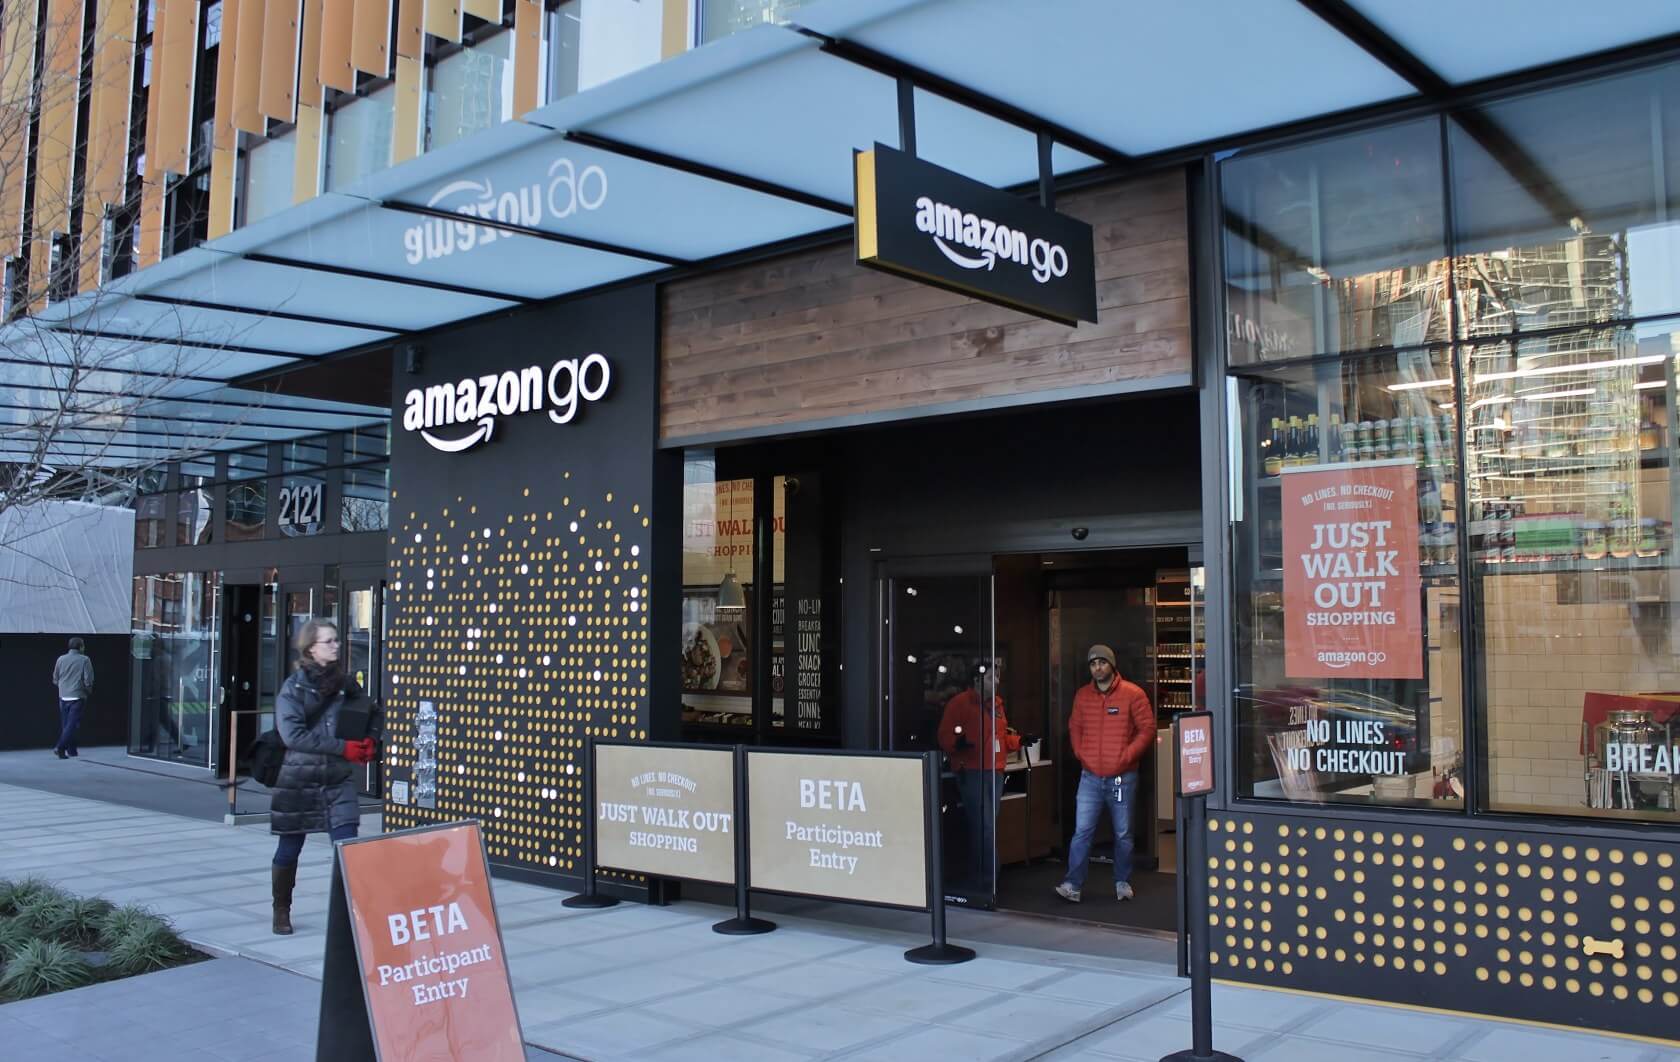 Amazon's cashier-free 'Go' stores will start accepting cash to address 'discrimination' concerns